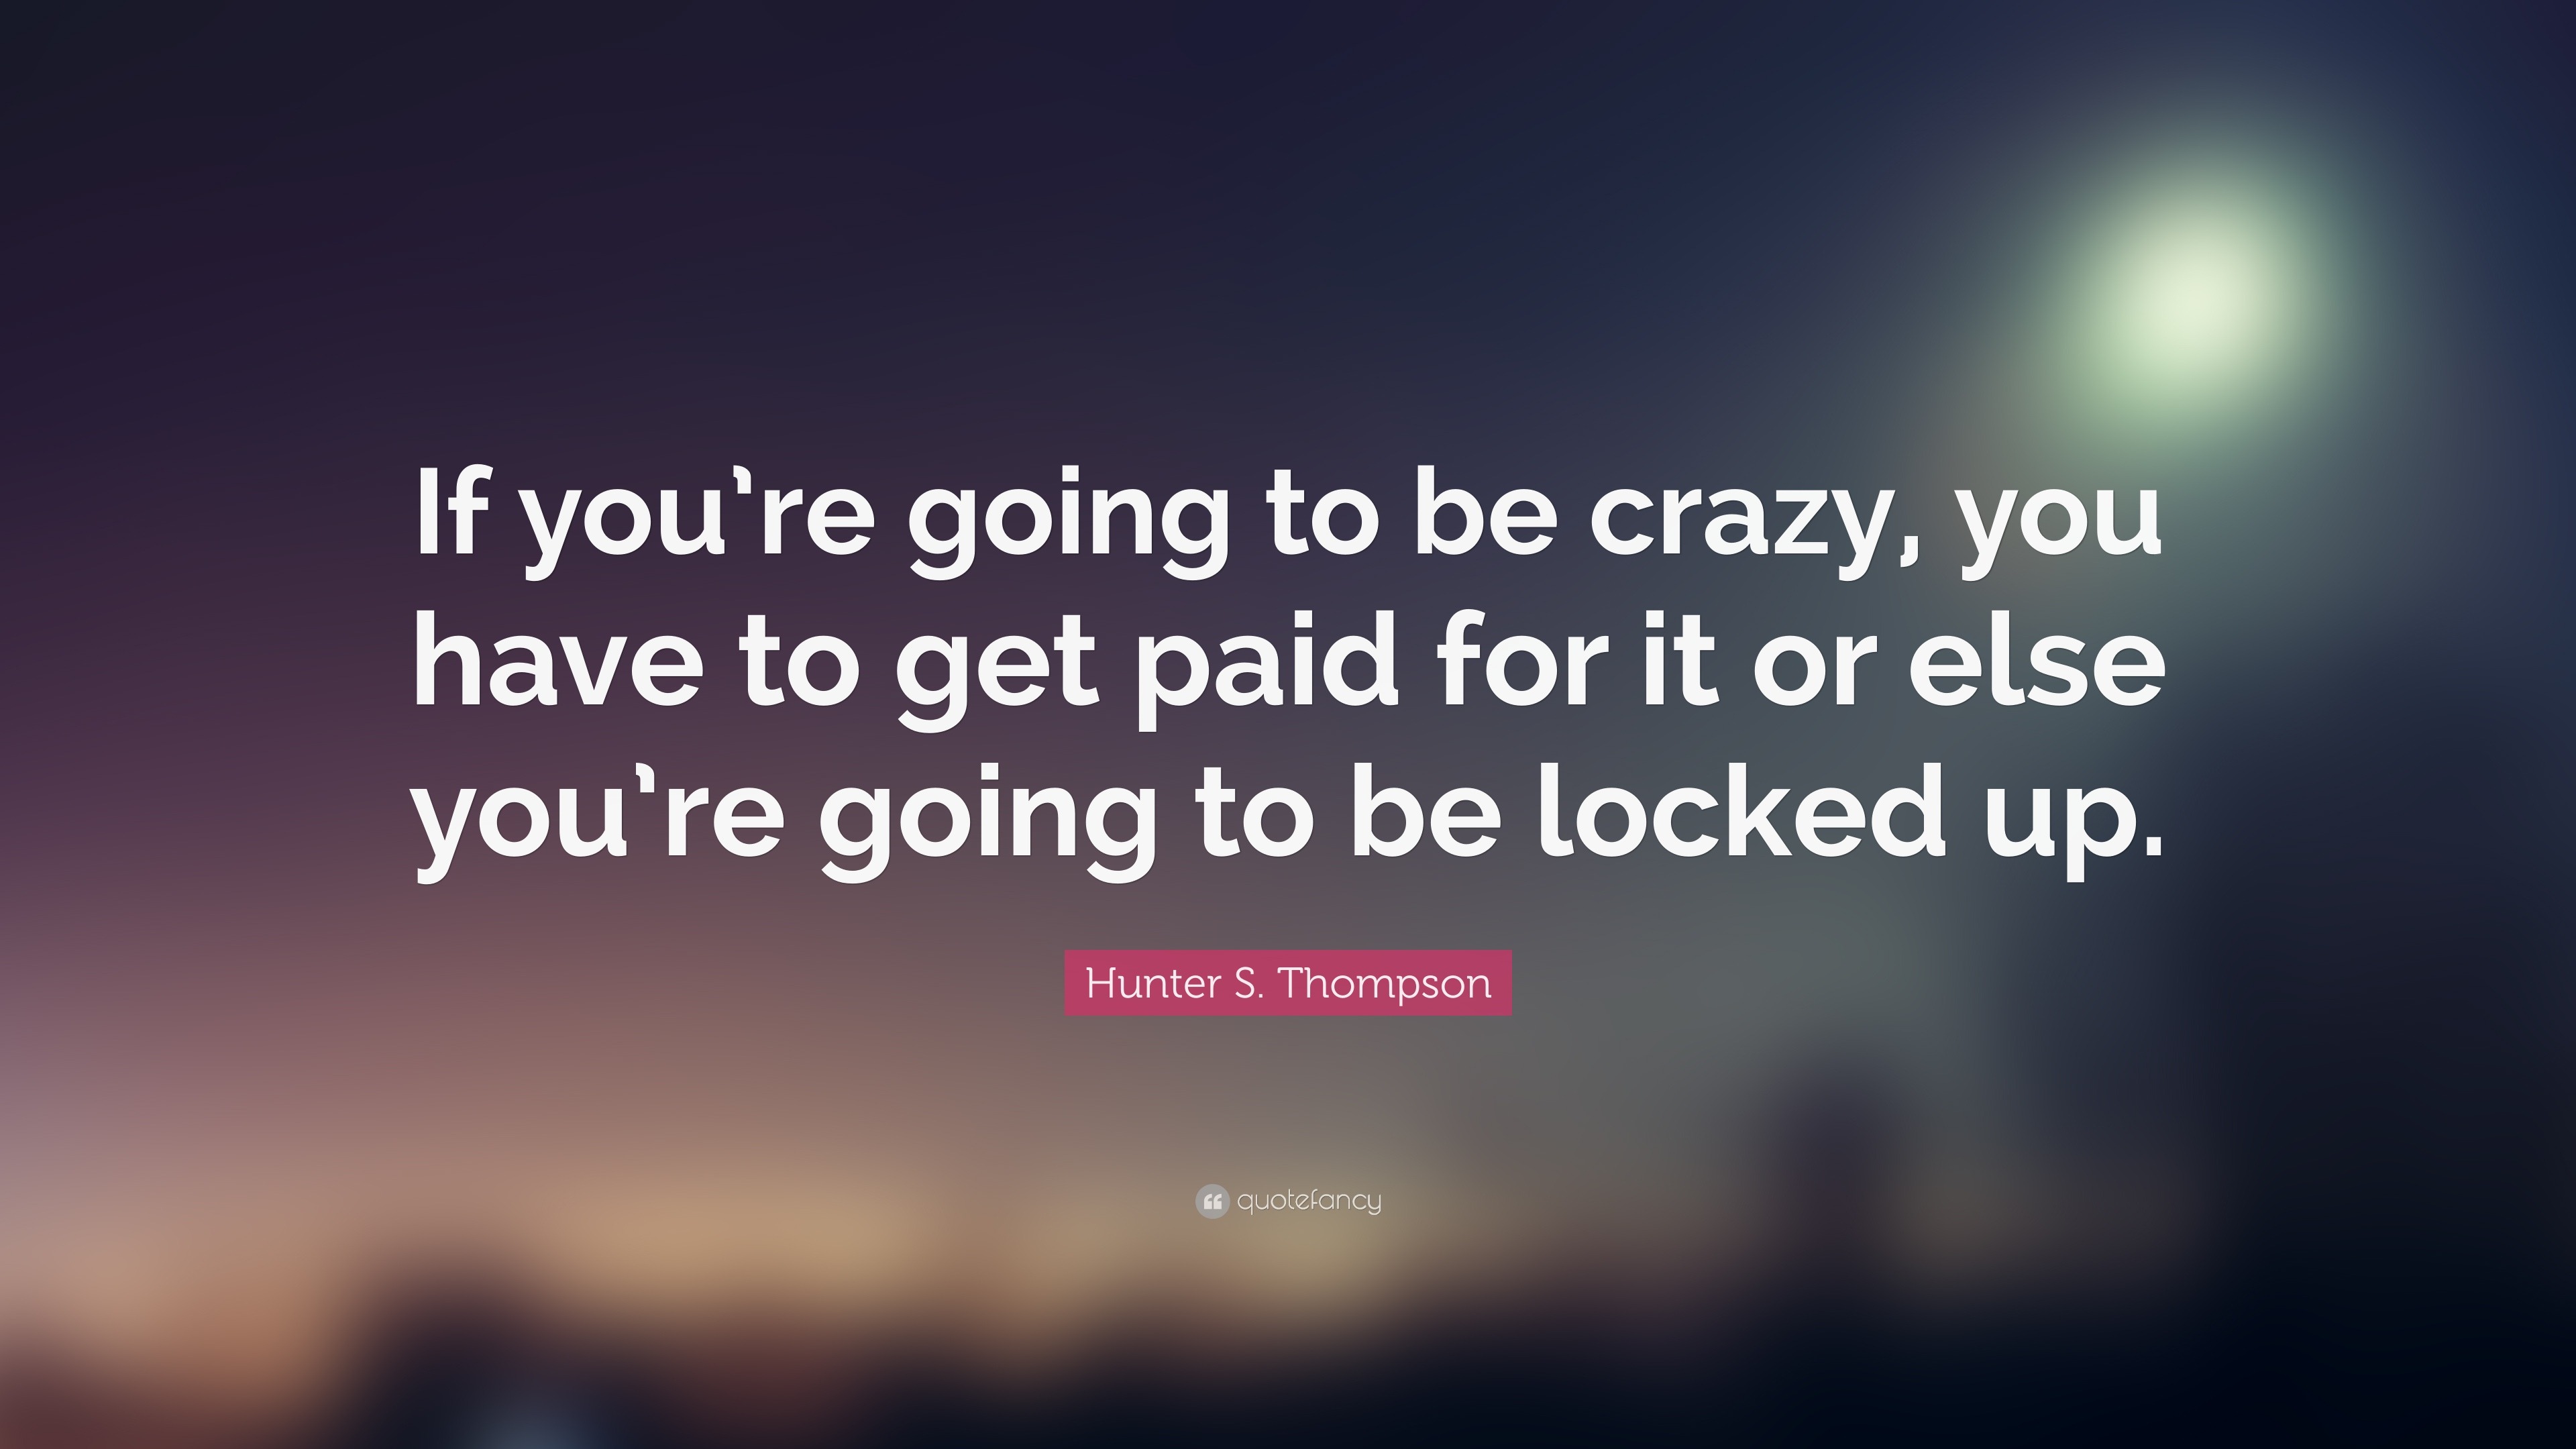 https://quotefancy.com/media/wallpaper/3840x2160/225042-Hunter-S-Thompson-Quote-If-you-re-going-to-be-crazy-you-have-to.jpg